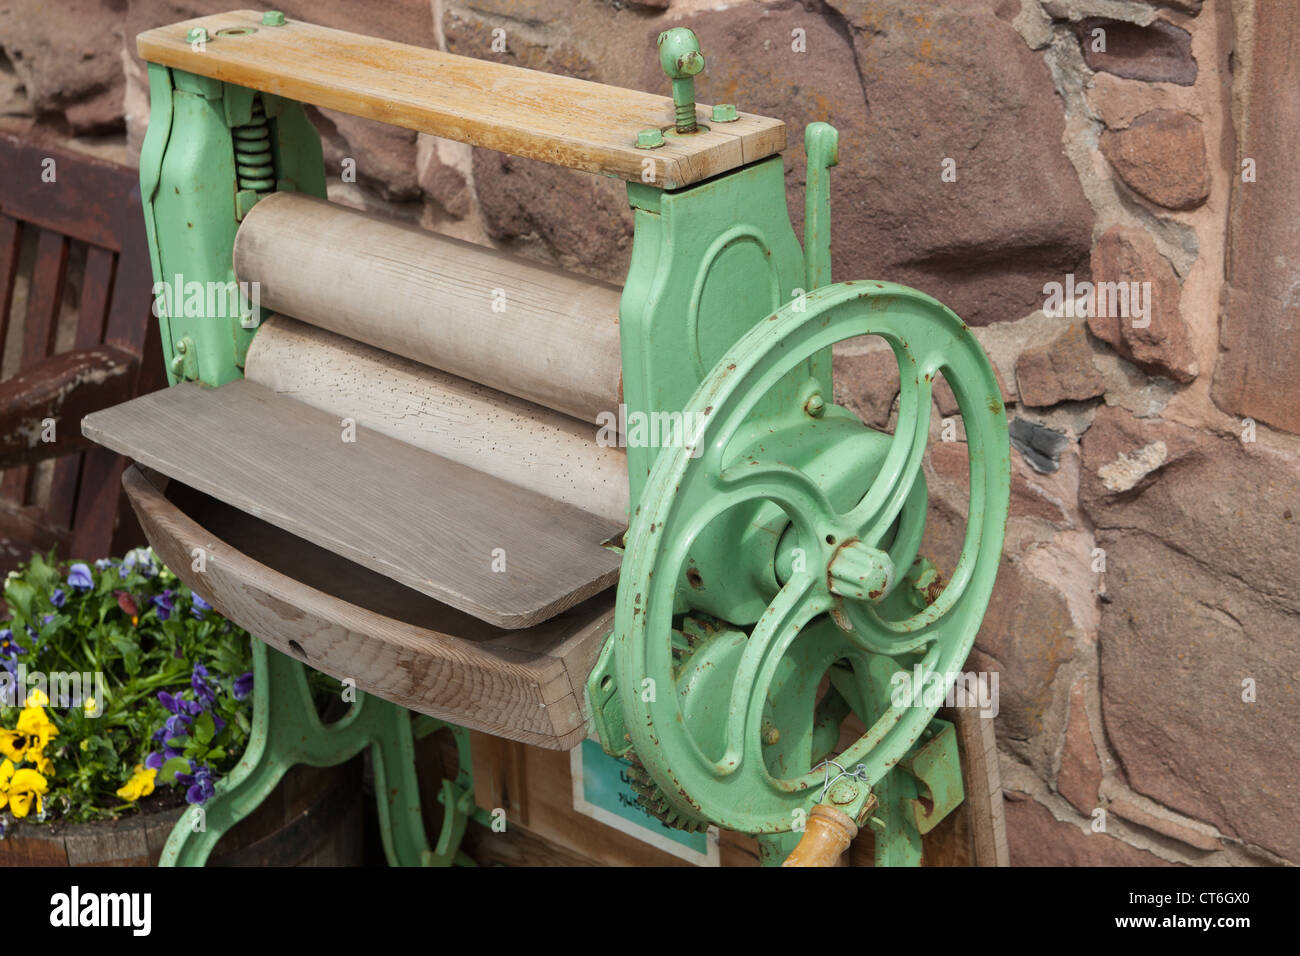 Old mangle outside home Stonehaven Harbour seafront Grampian Scotland UK Stock Photo